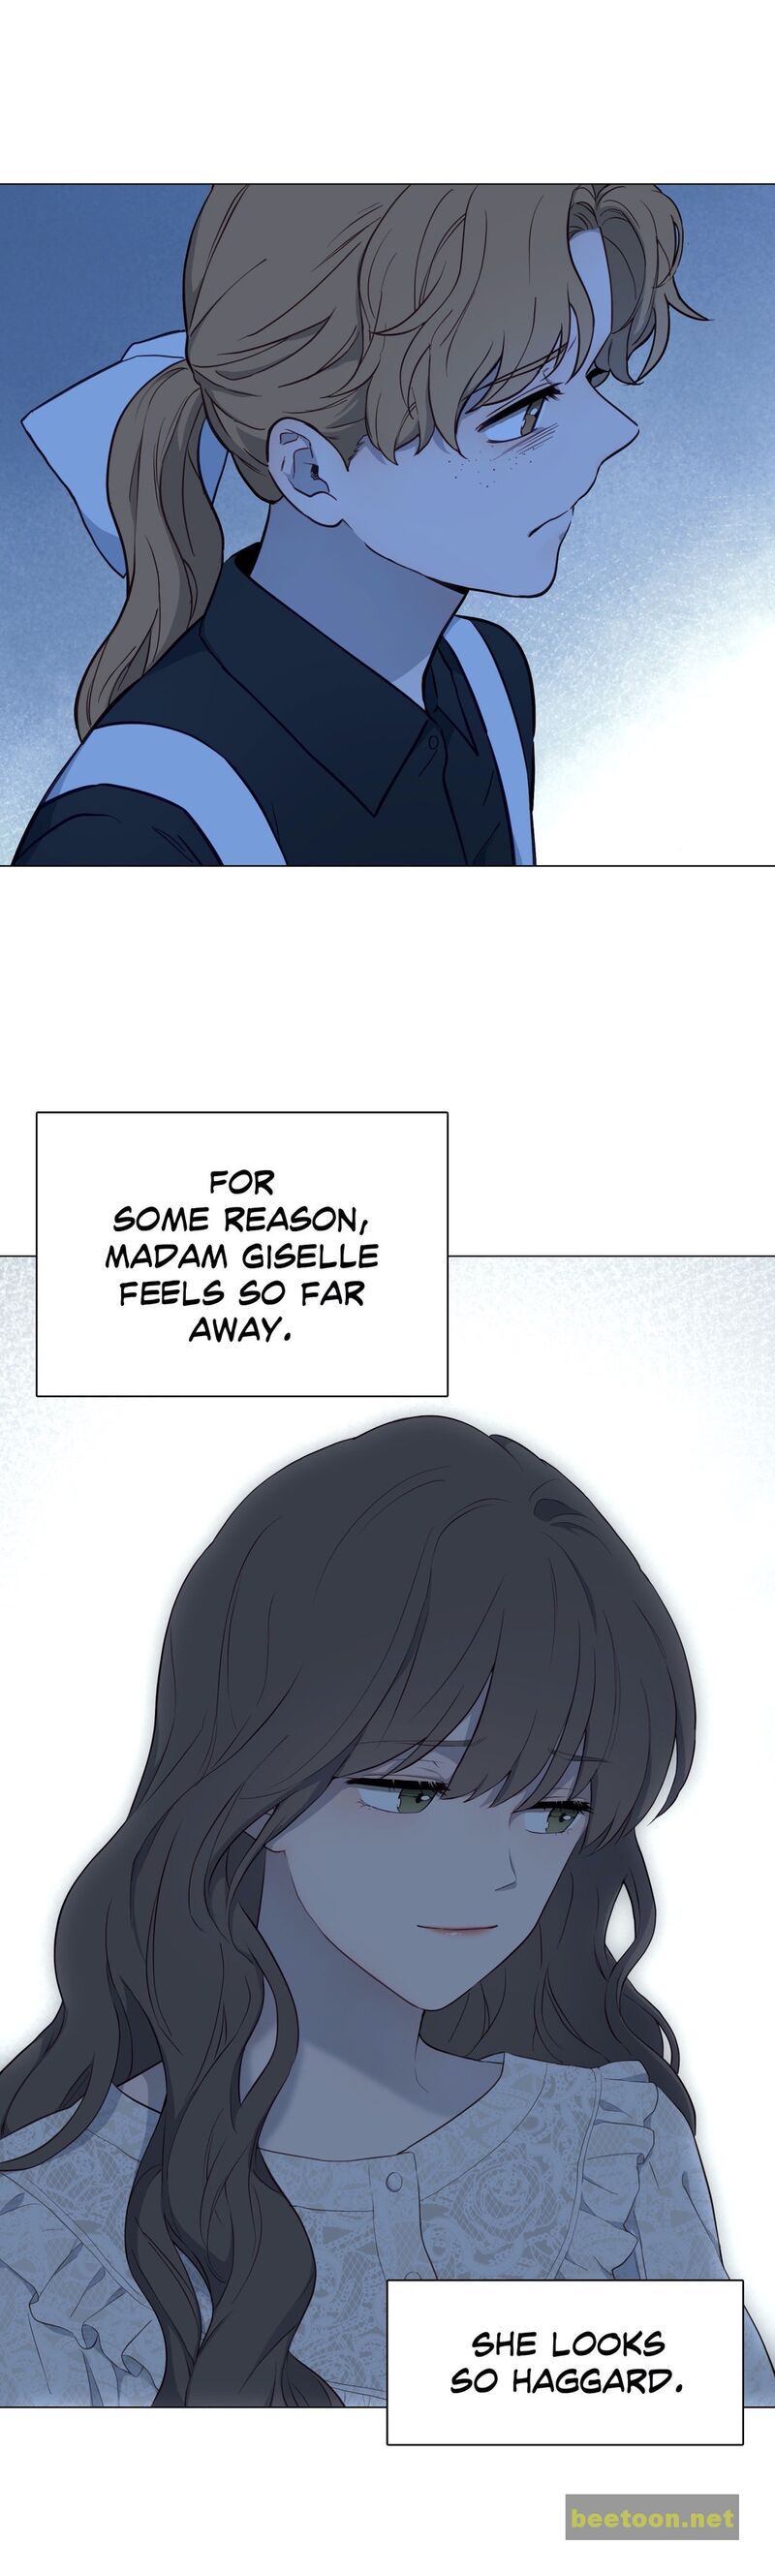 The Blood of Madam Giselle Chapter 58 - MyToon.net